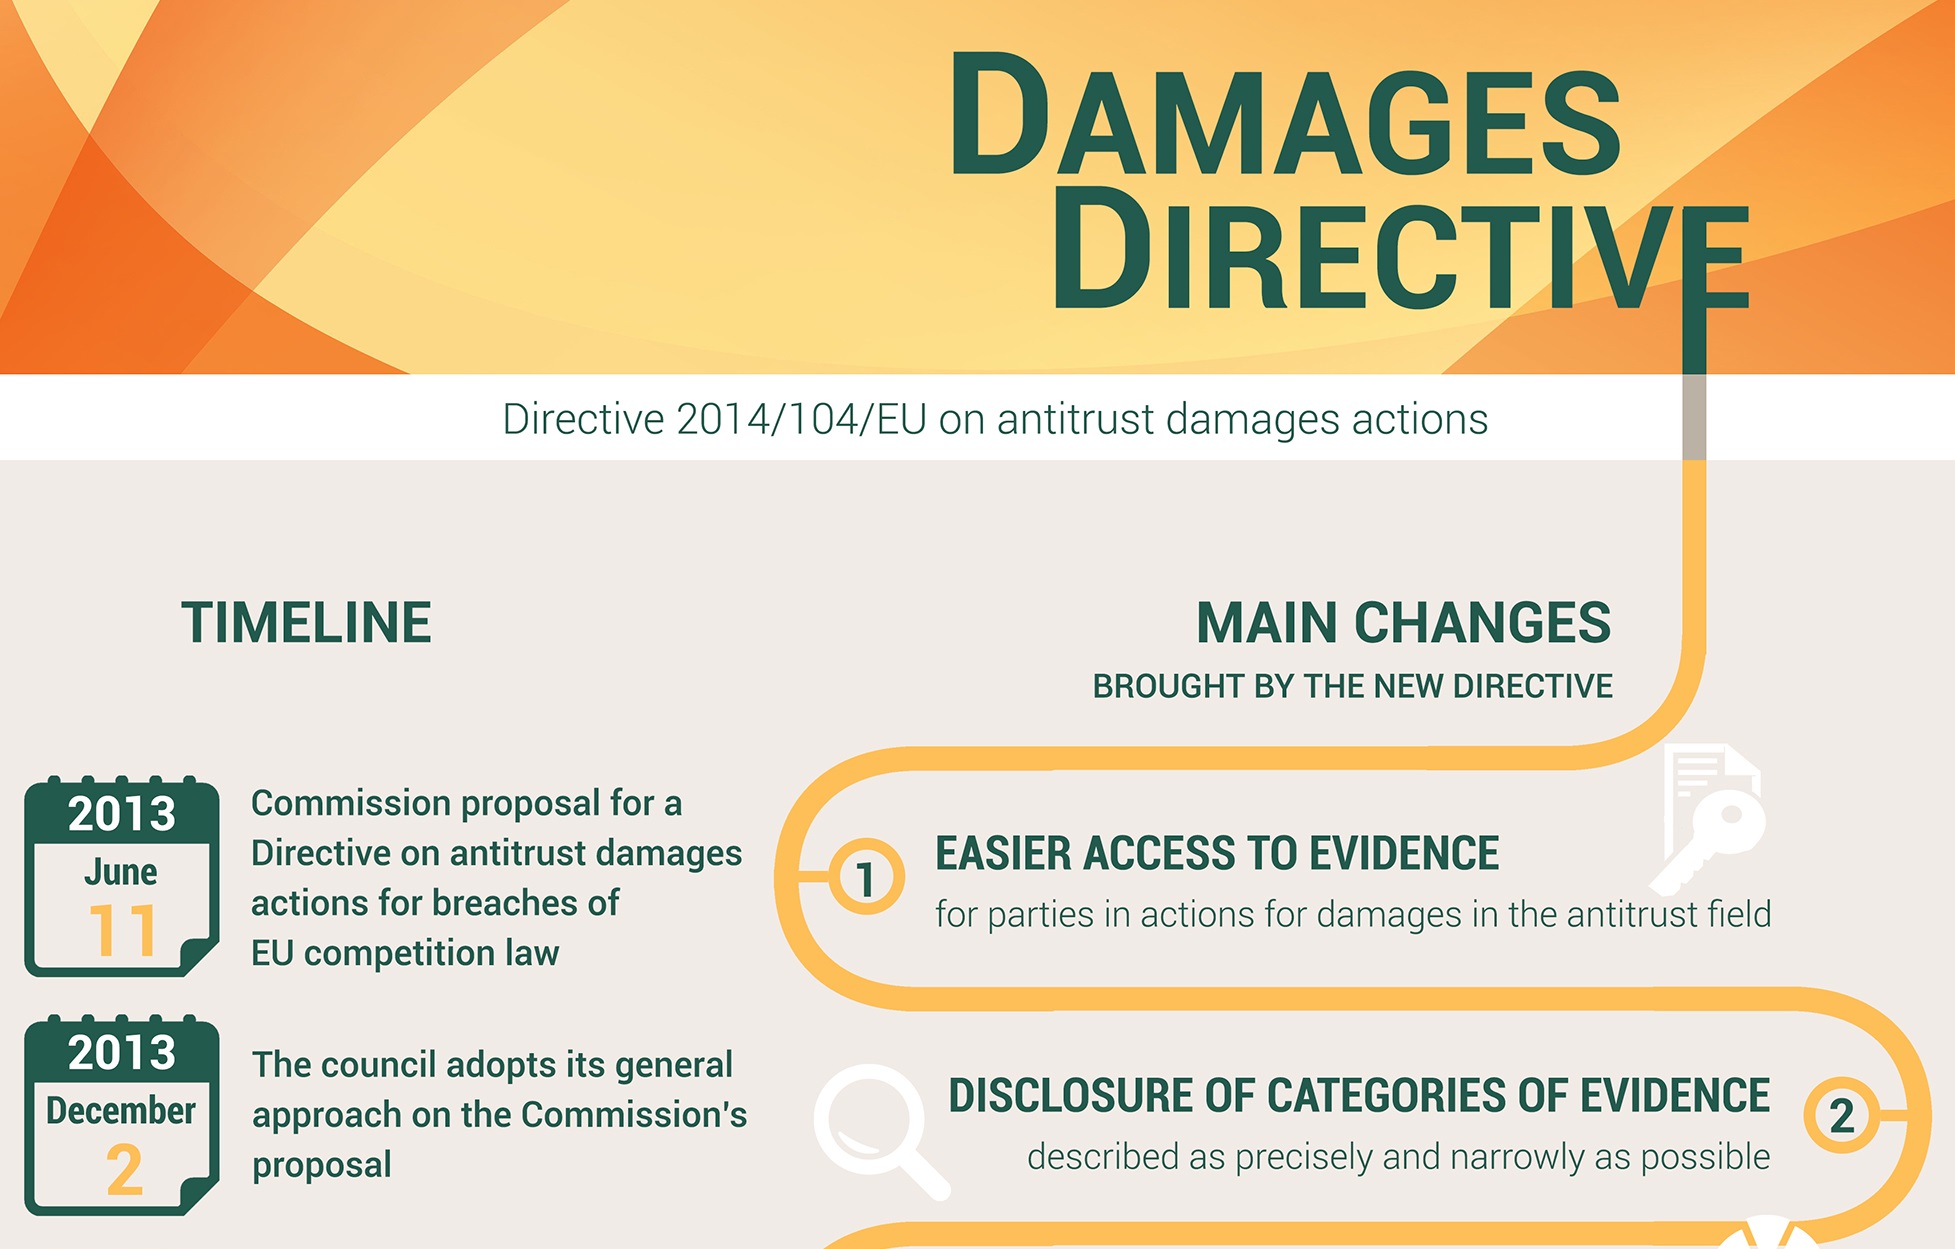 Print Screen - The Damages Directive